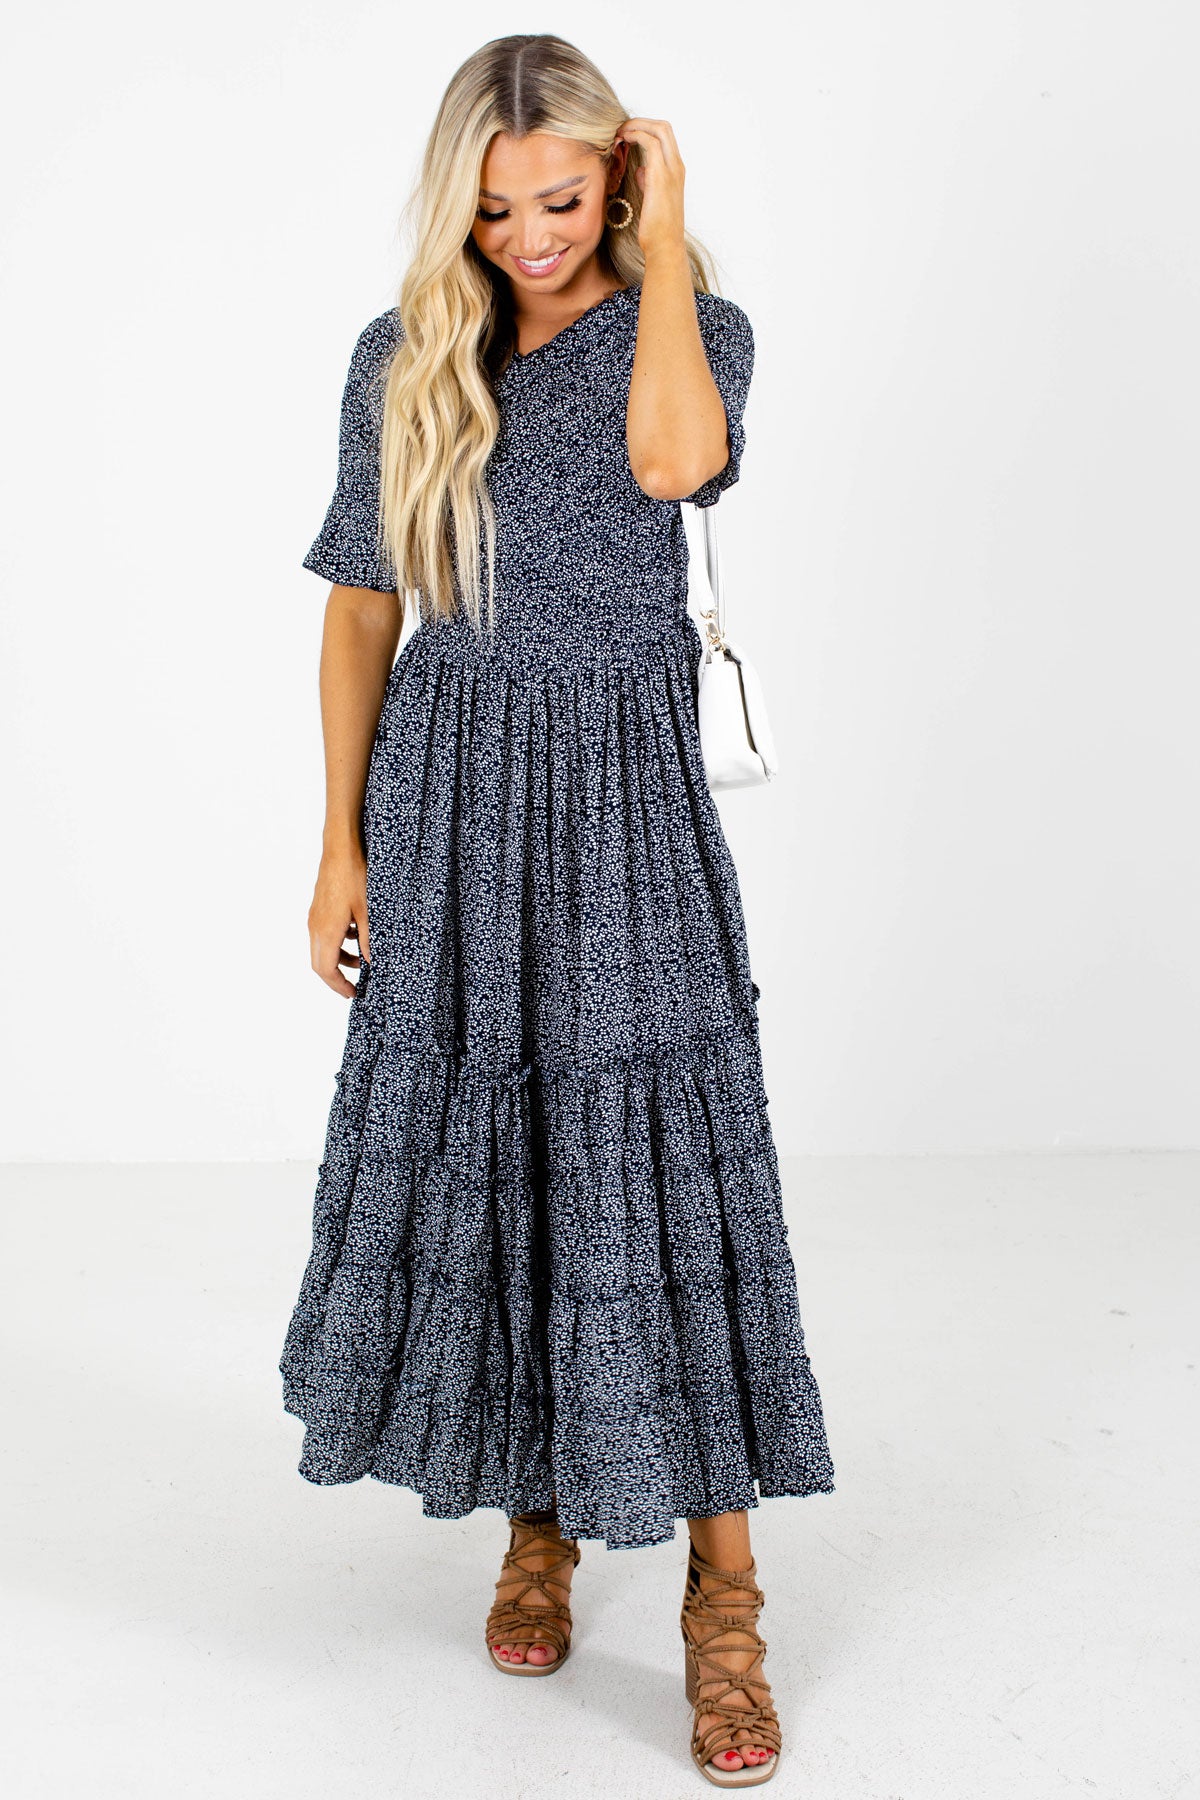 Navy Floral Midi Dress Boutique Clothing for Women